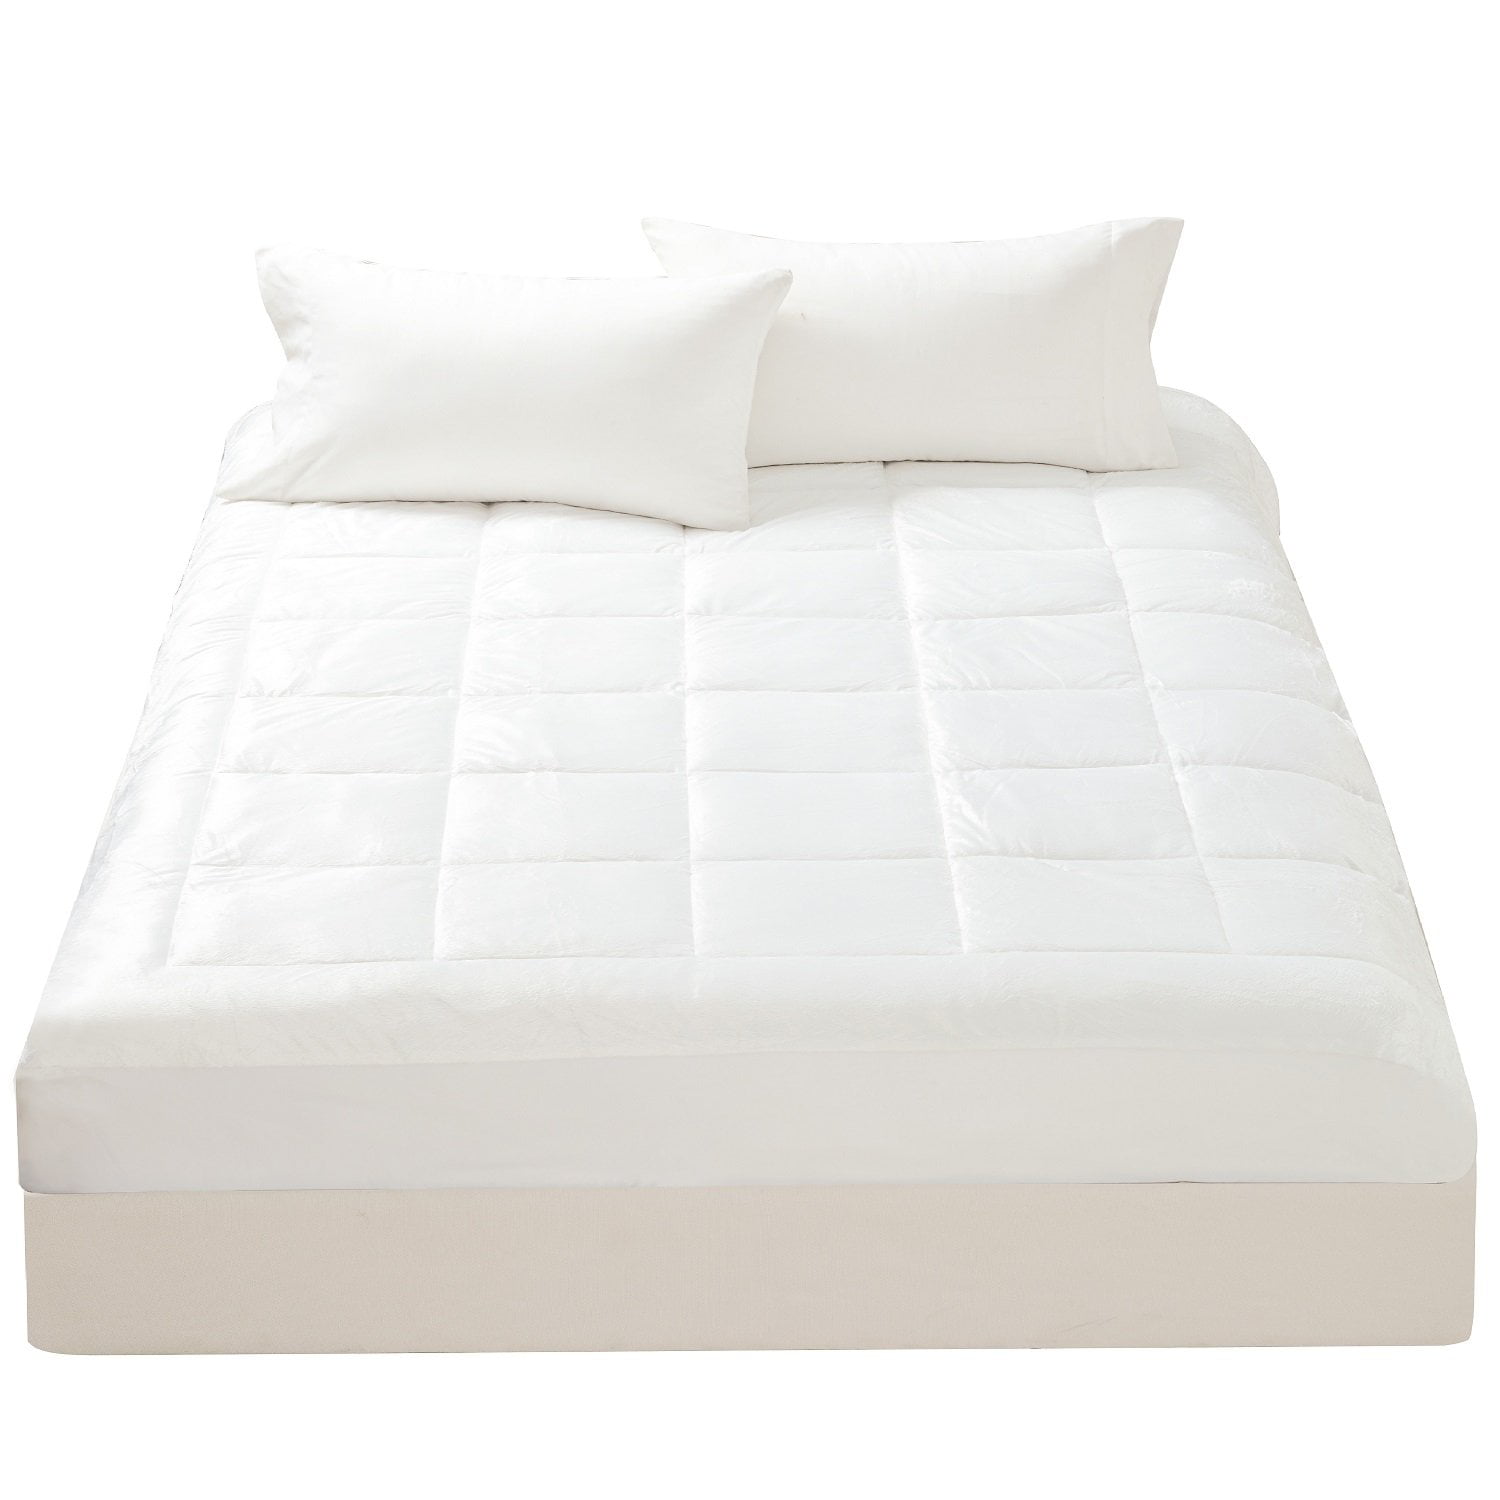 White for sale online Oaskys Mattress Pad Cover Cotton Top With Stretches to 18'' Size Queen 